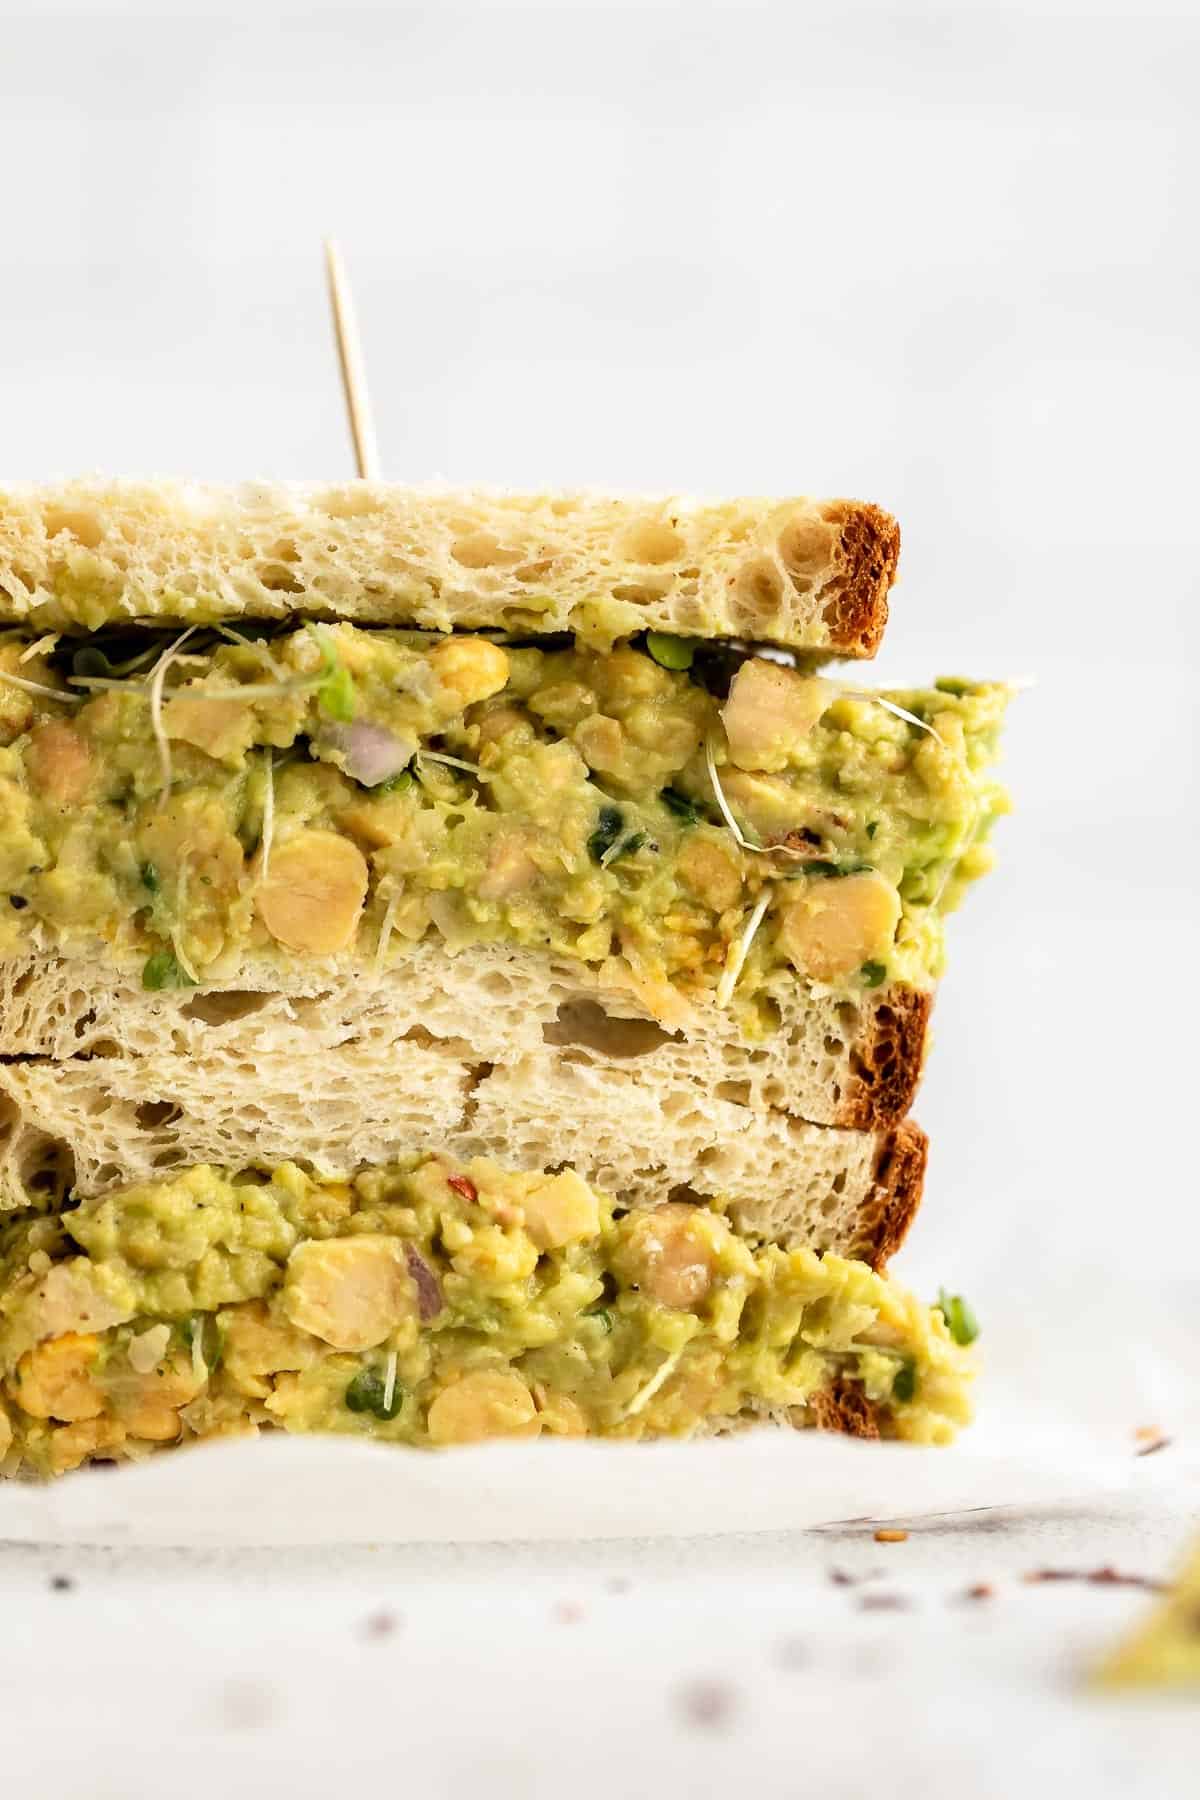 mashed chickpea avocado salad in a sandwich with lemon